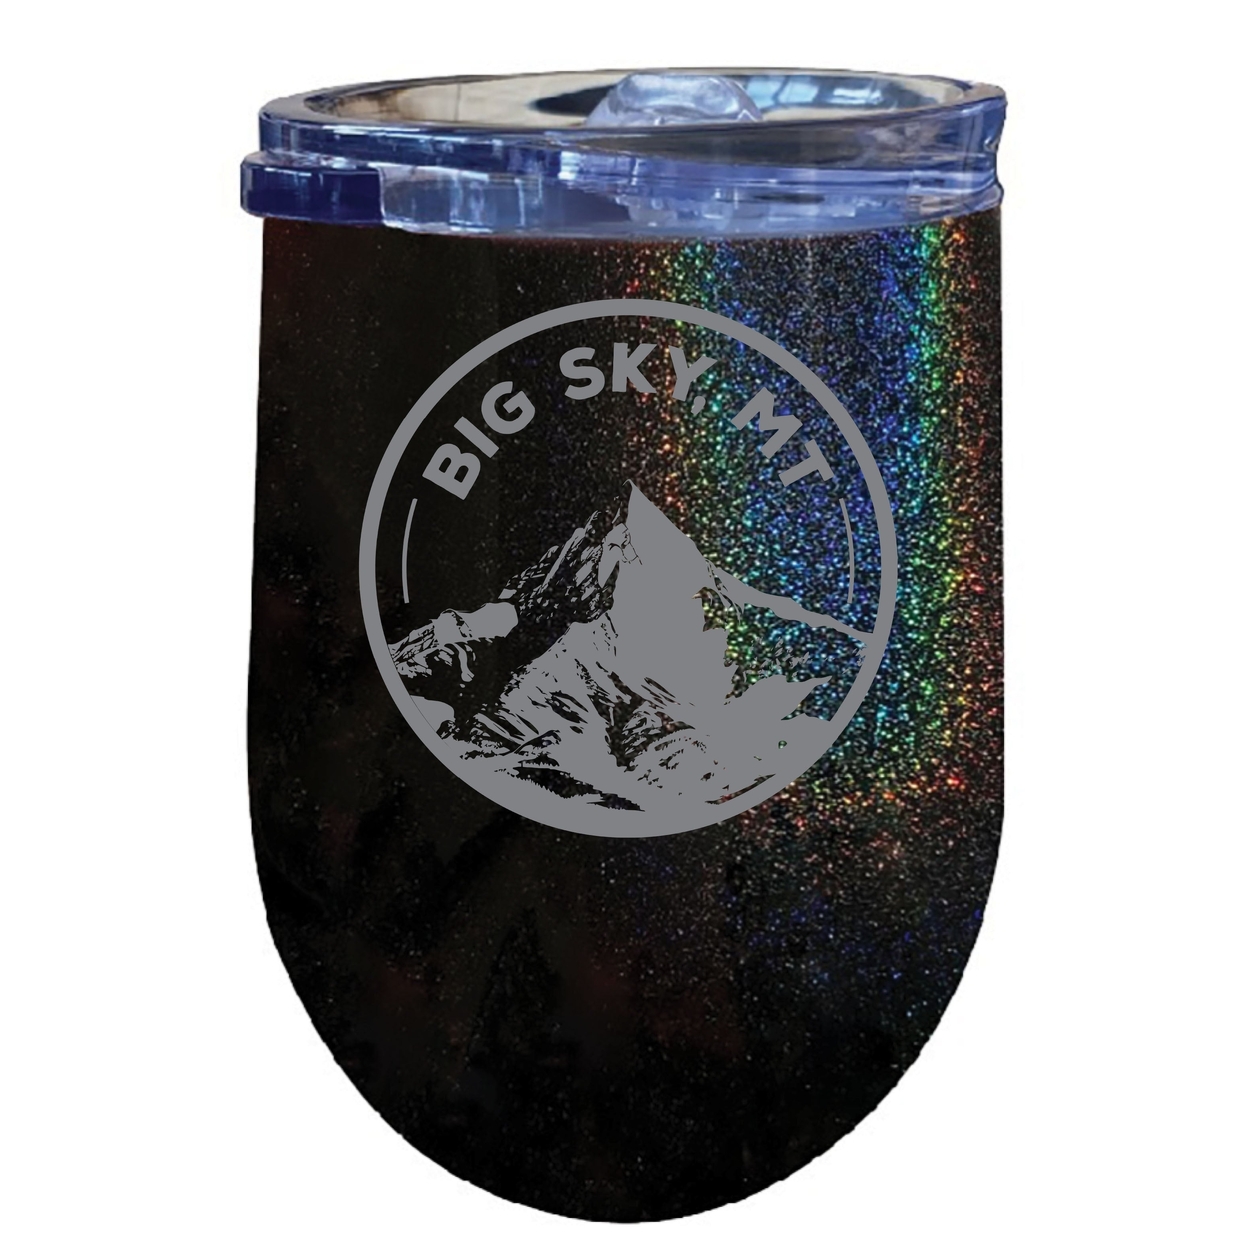 Big Sky Montana Souvenir 12 Oz Engraved Insulated Wine Stainless Steel Tumbler - Rose Gold,,4-Pack